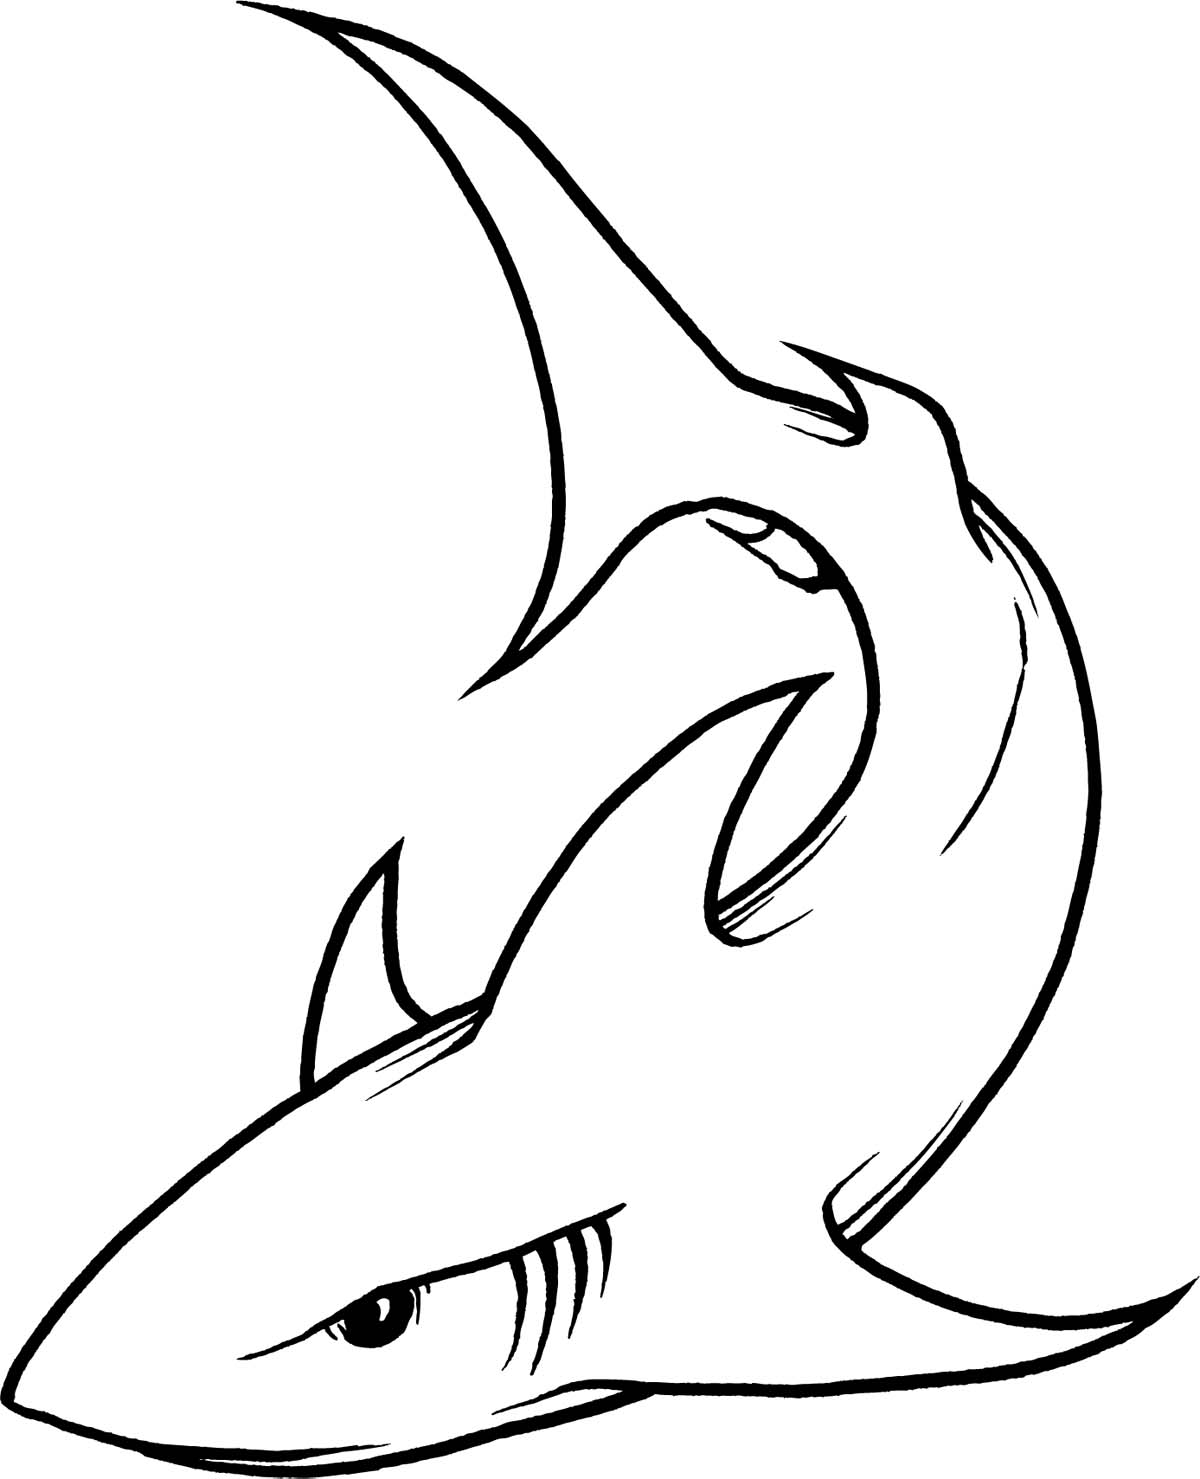 hammerhead-shark-outline-free-download-on-clipartmag